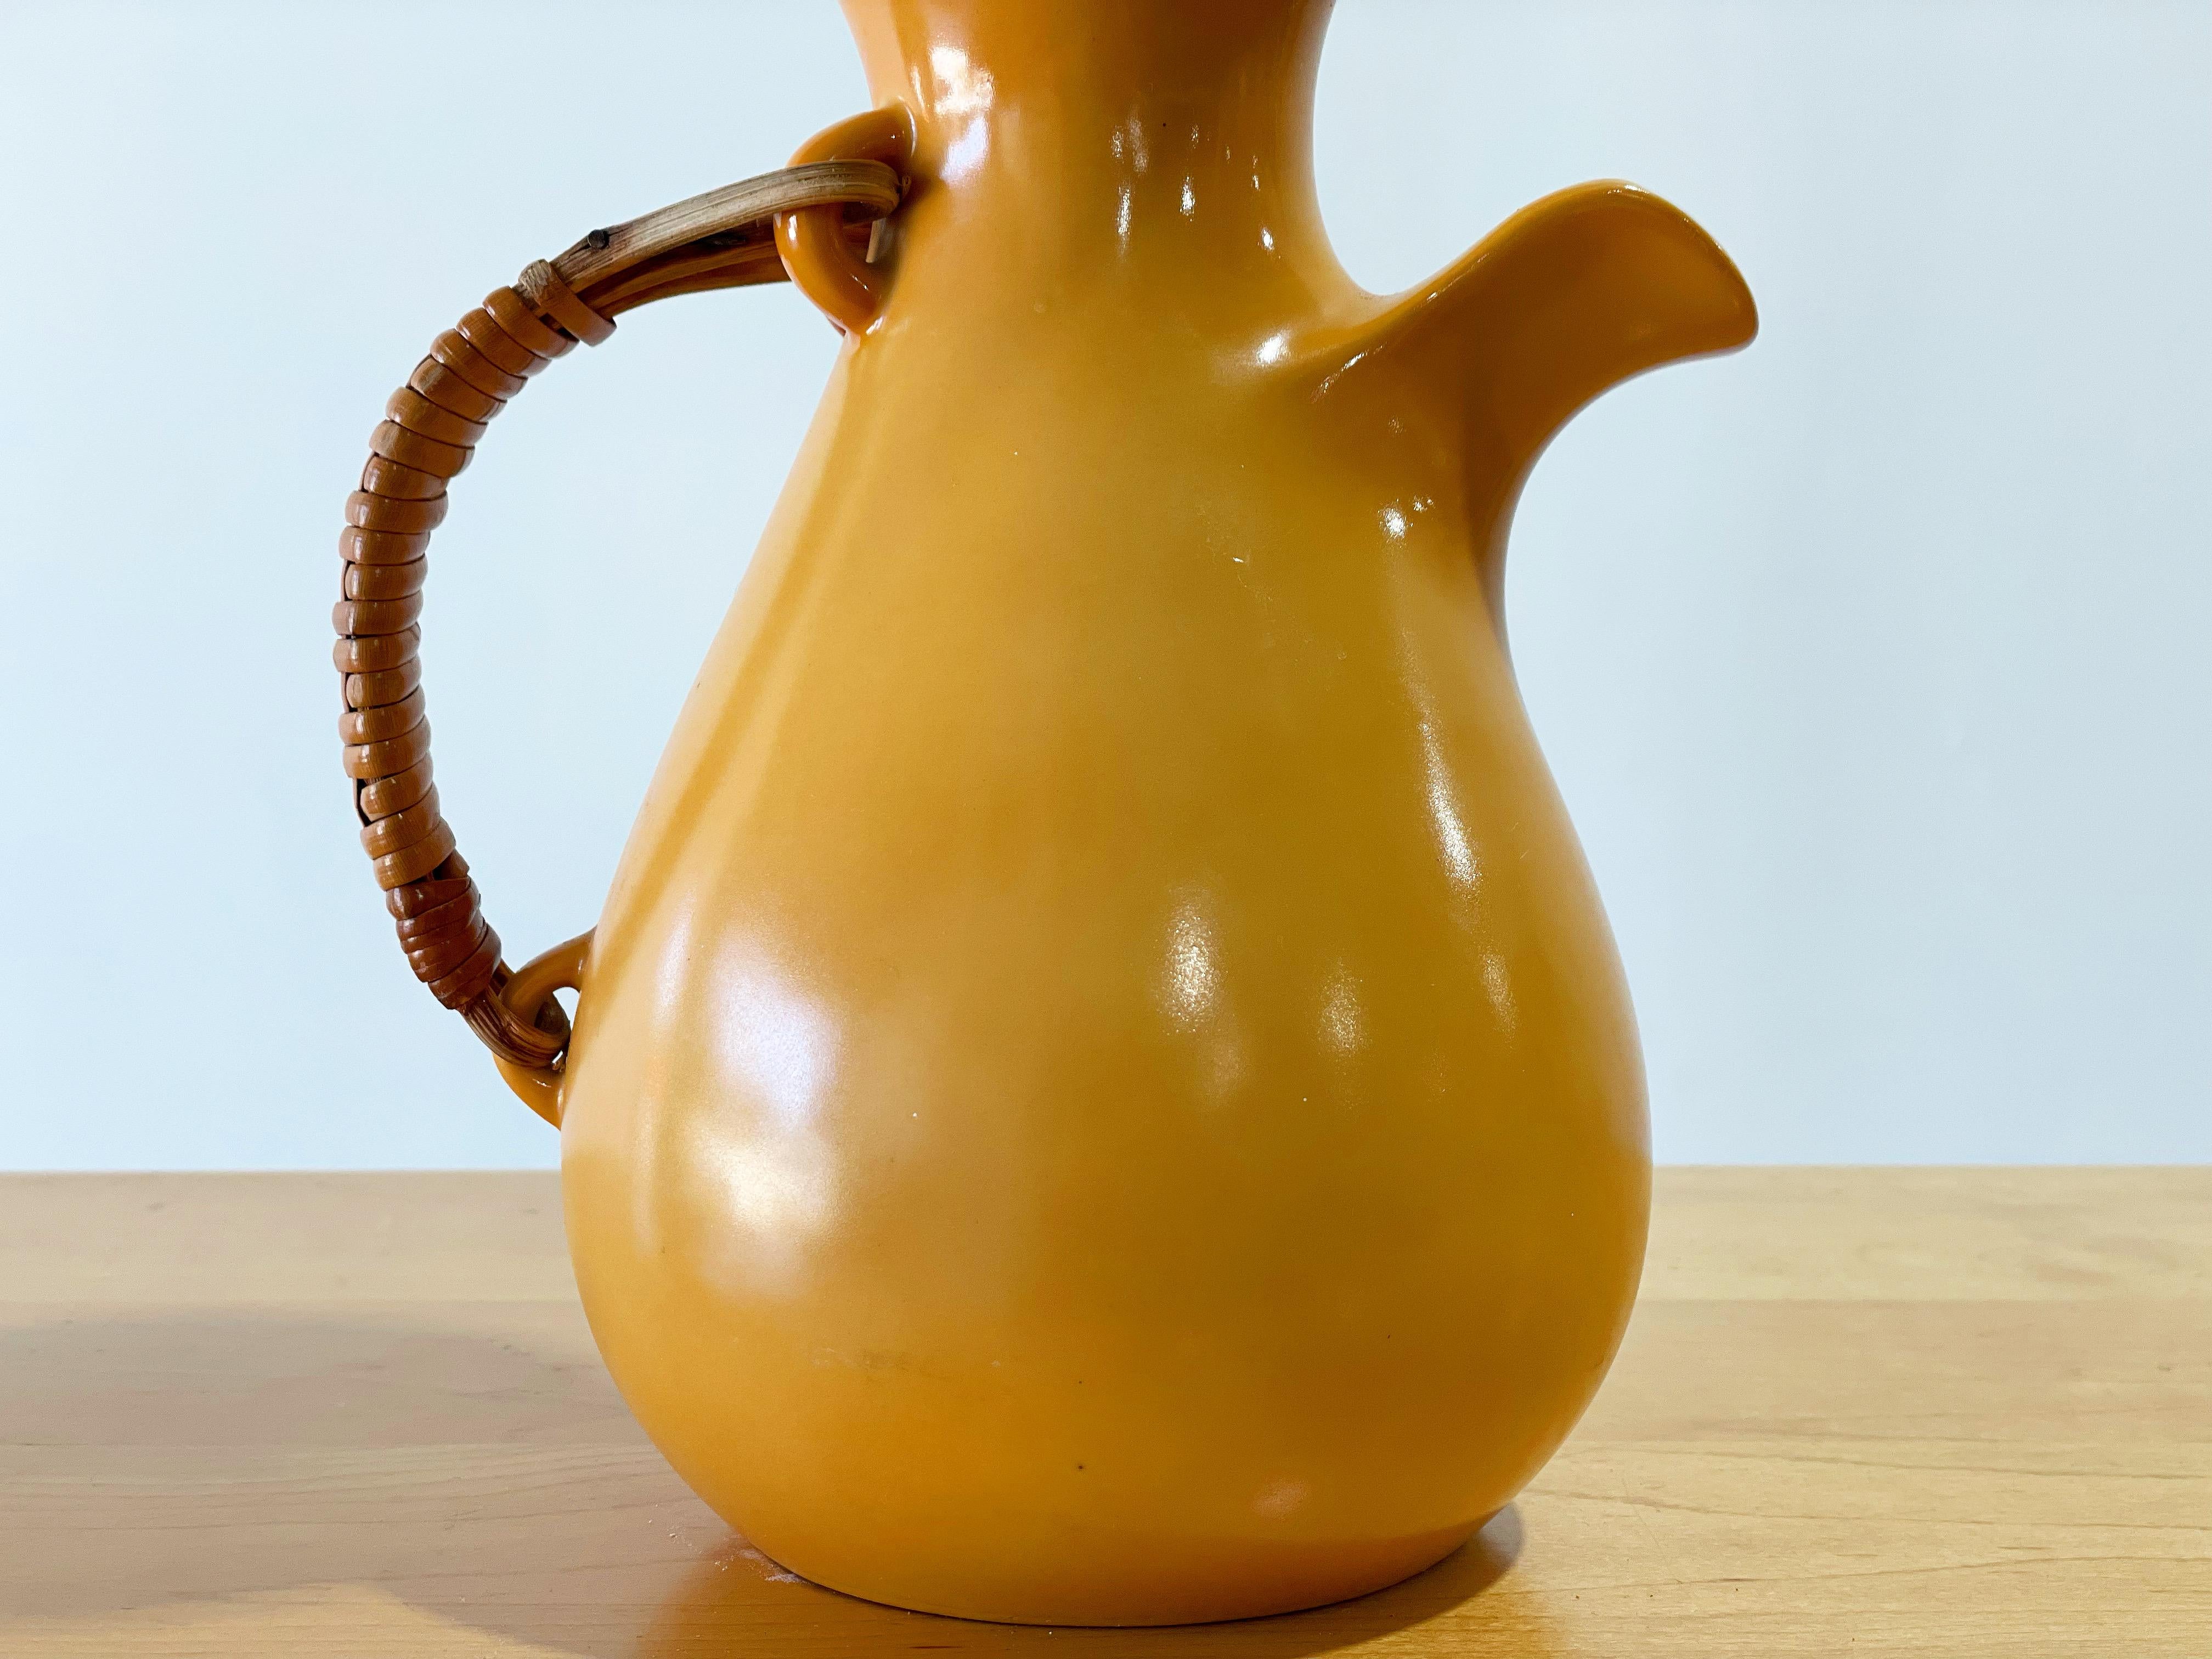 Exquisite modernist coffee carafe designed by Kenji Fujita for Freeman Lederman. Beverage pitcher in rare apricot glaze with glossy white interior. Marked with the FL logo. This example in the 